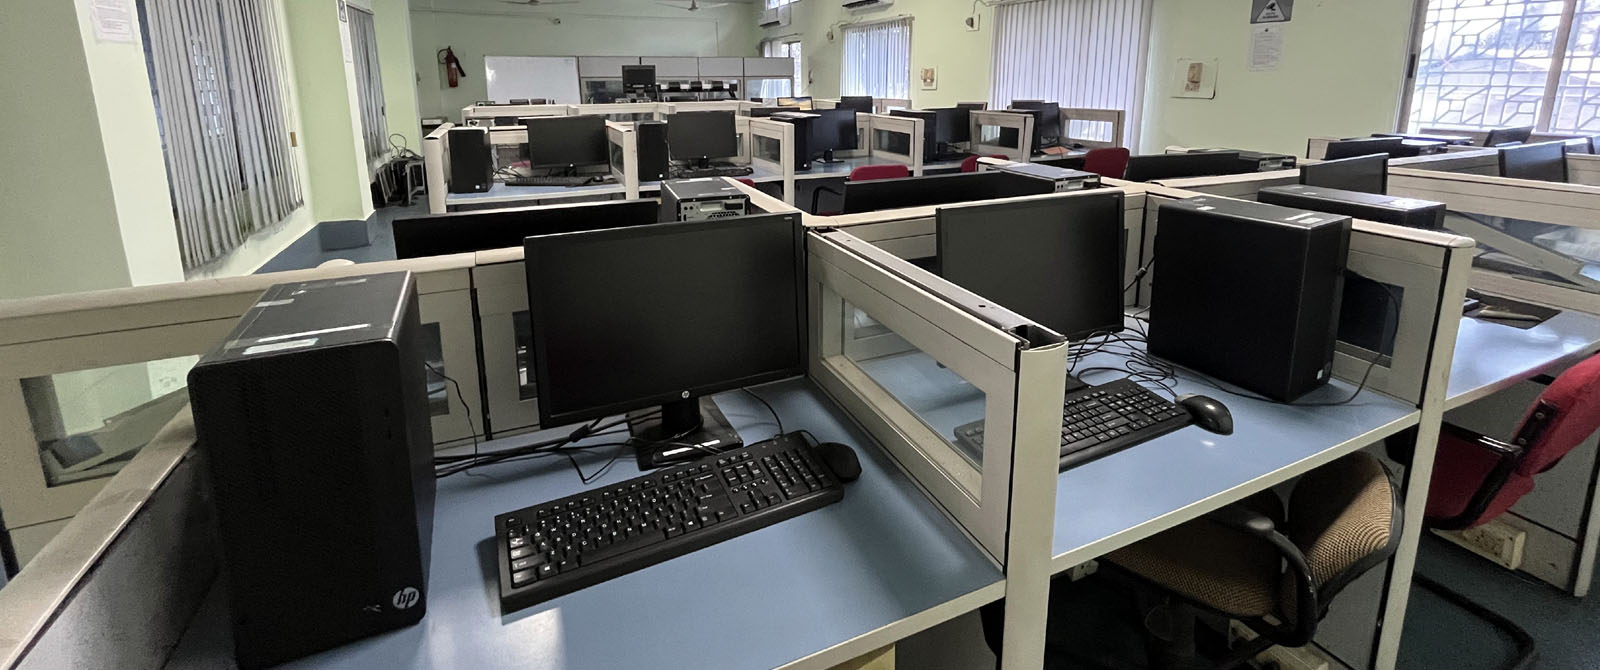 Computer Laboratory at NERIWALM